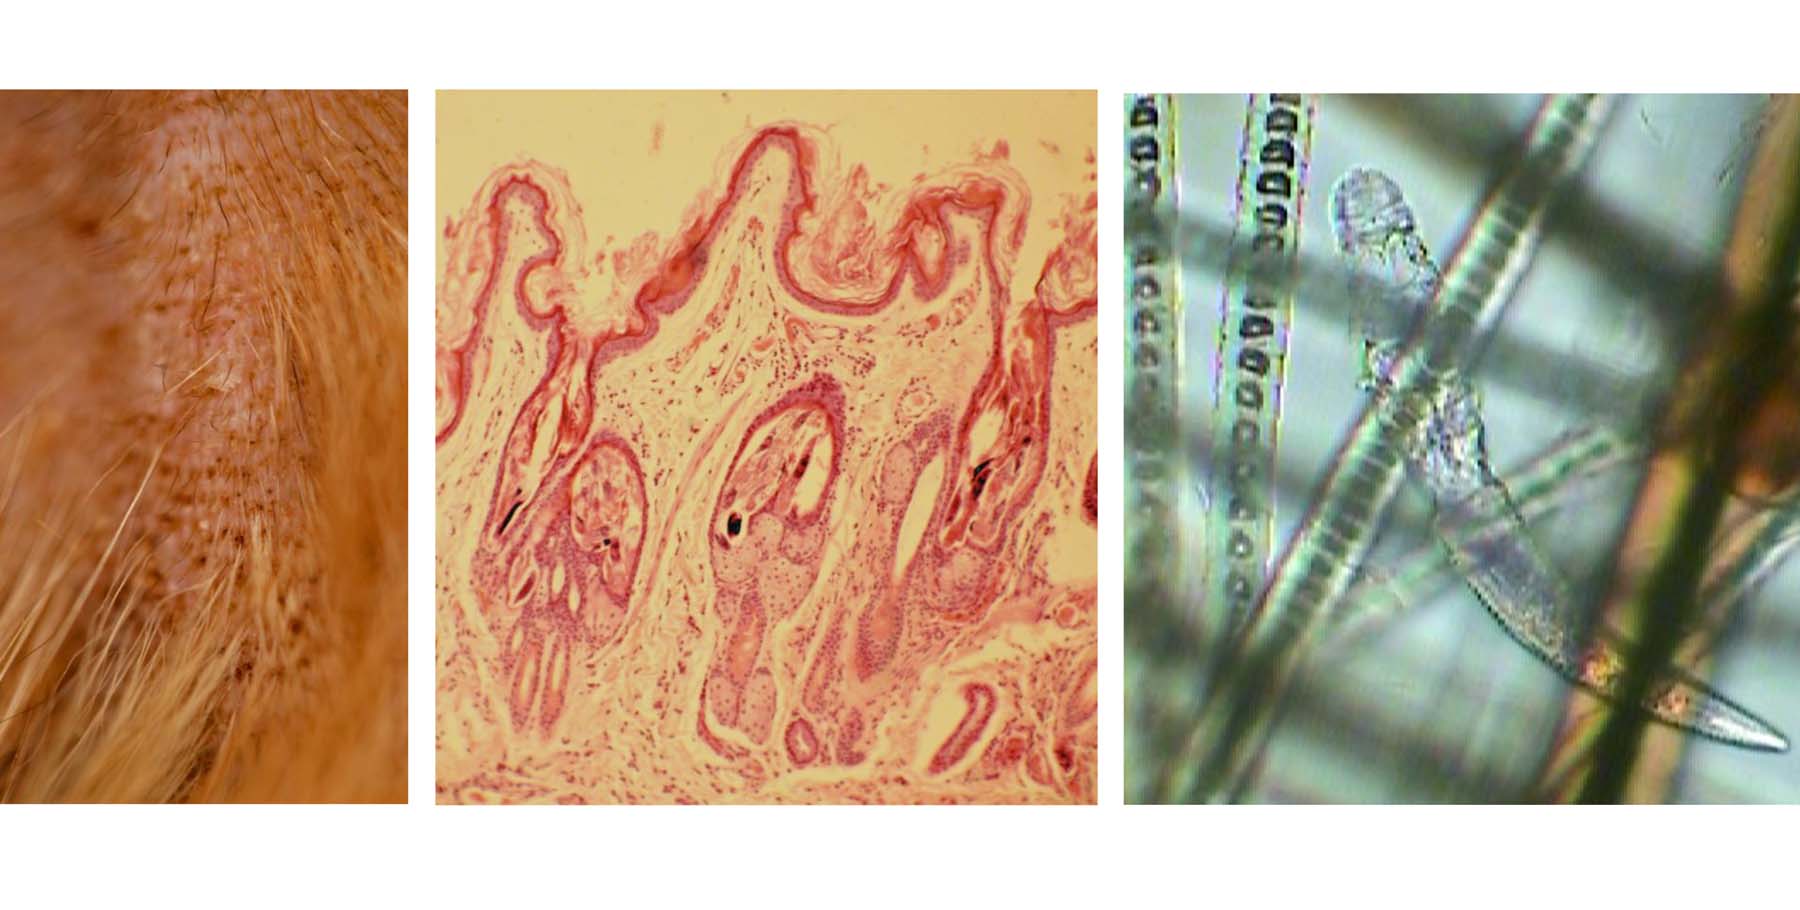 Rare Feline Demodicosis: Comedones, Demodex Cati Mites within Hair Follicles in Skin Biopsy; adult Mite in Diagnostic Hair Pluck